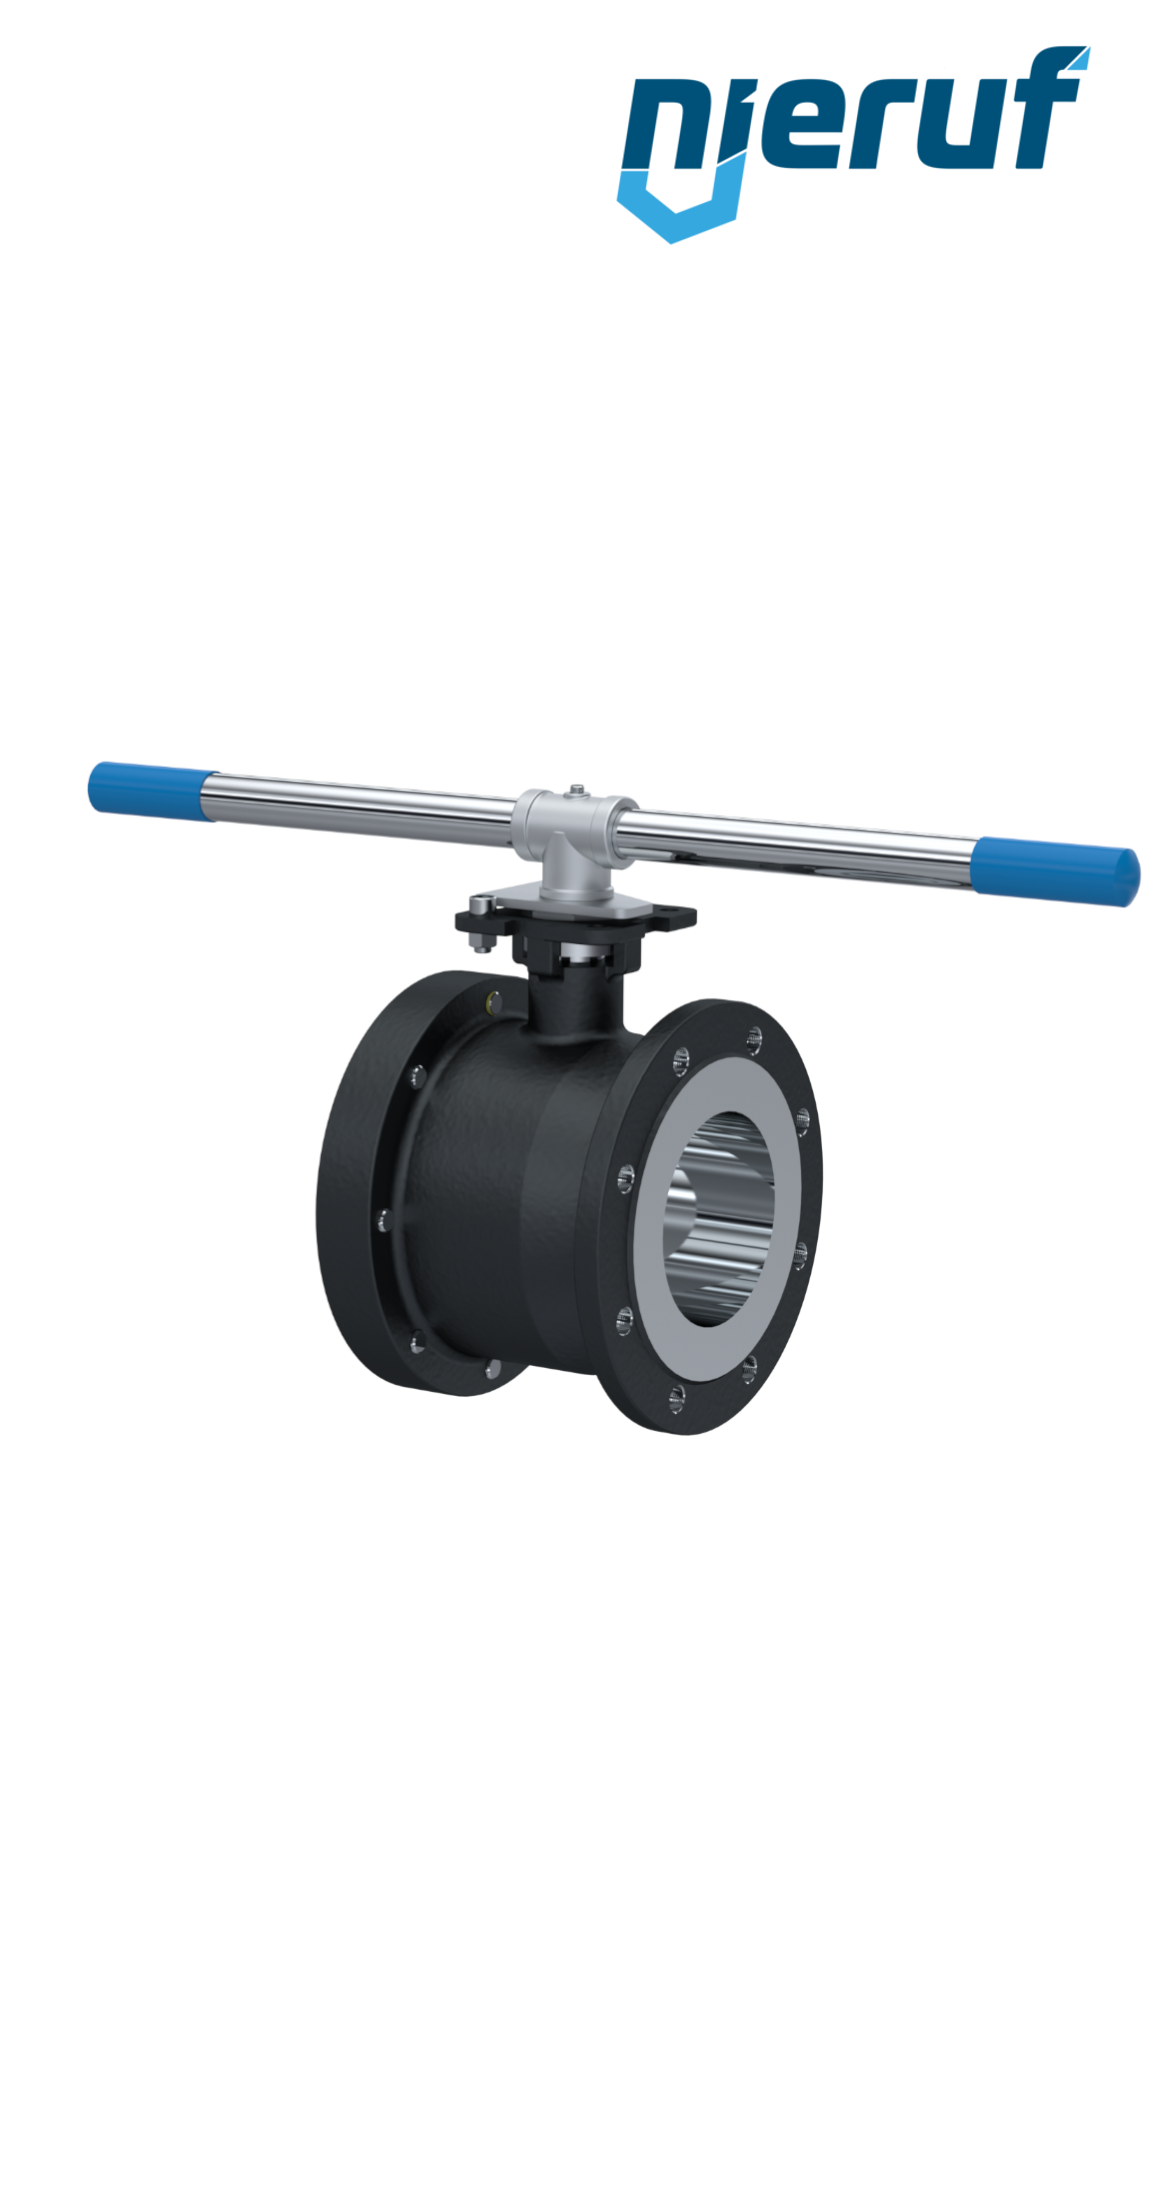 Compact ball valve DN100 PN40 FK03 carbon steel 1.0619 ball stainless steel 1.4408